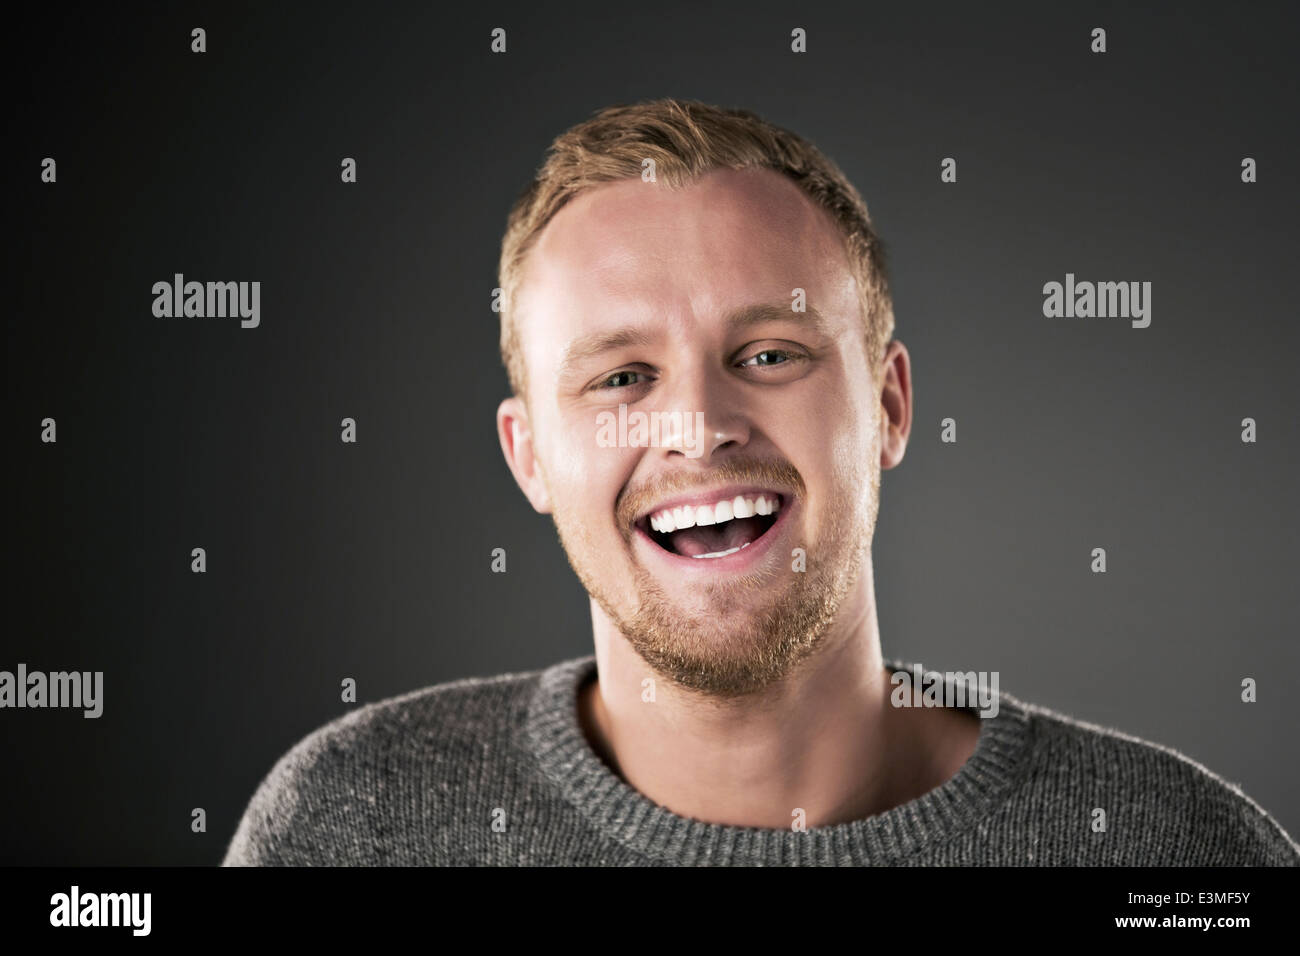 Portrait of laughing man Stock Photo